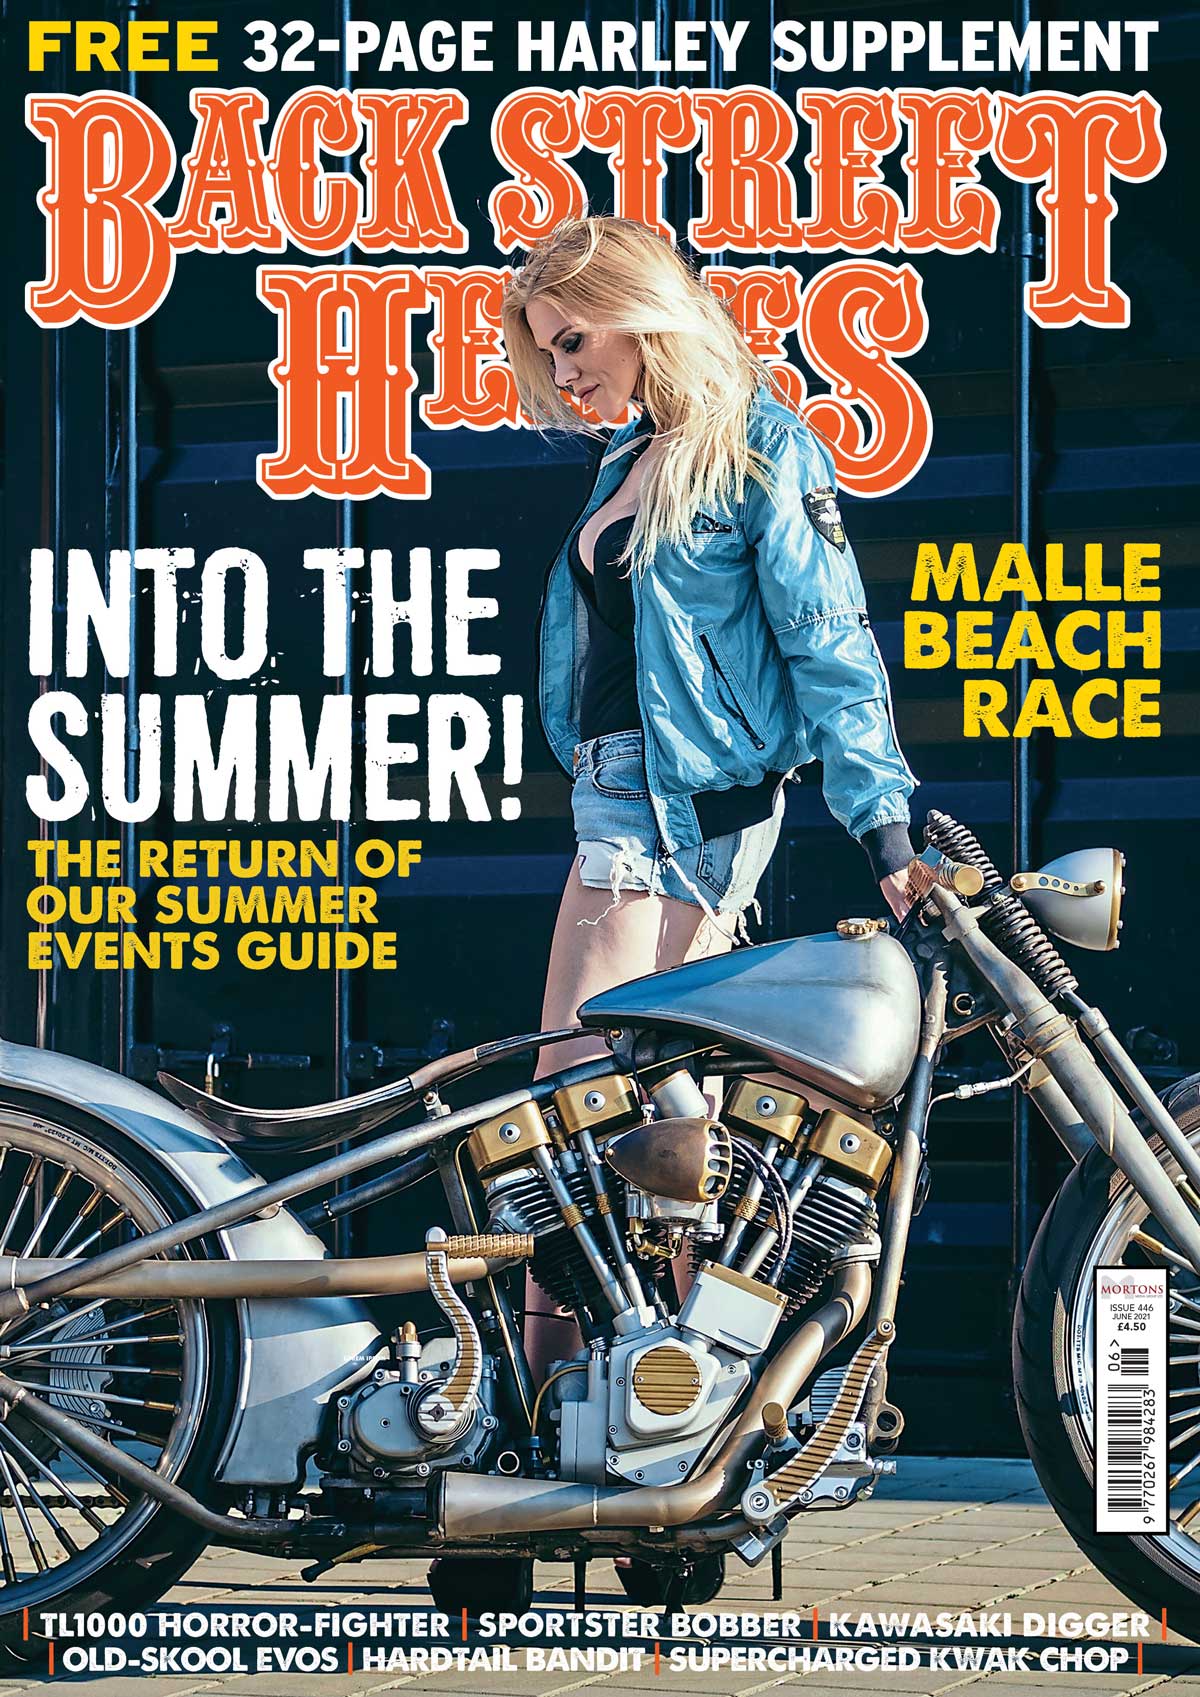 PREVIEW: June issue of Back Street Heroes magazine